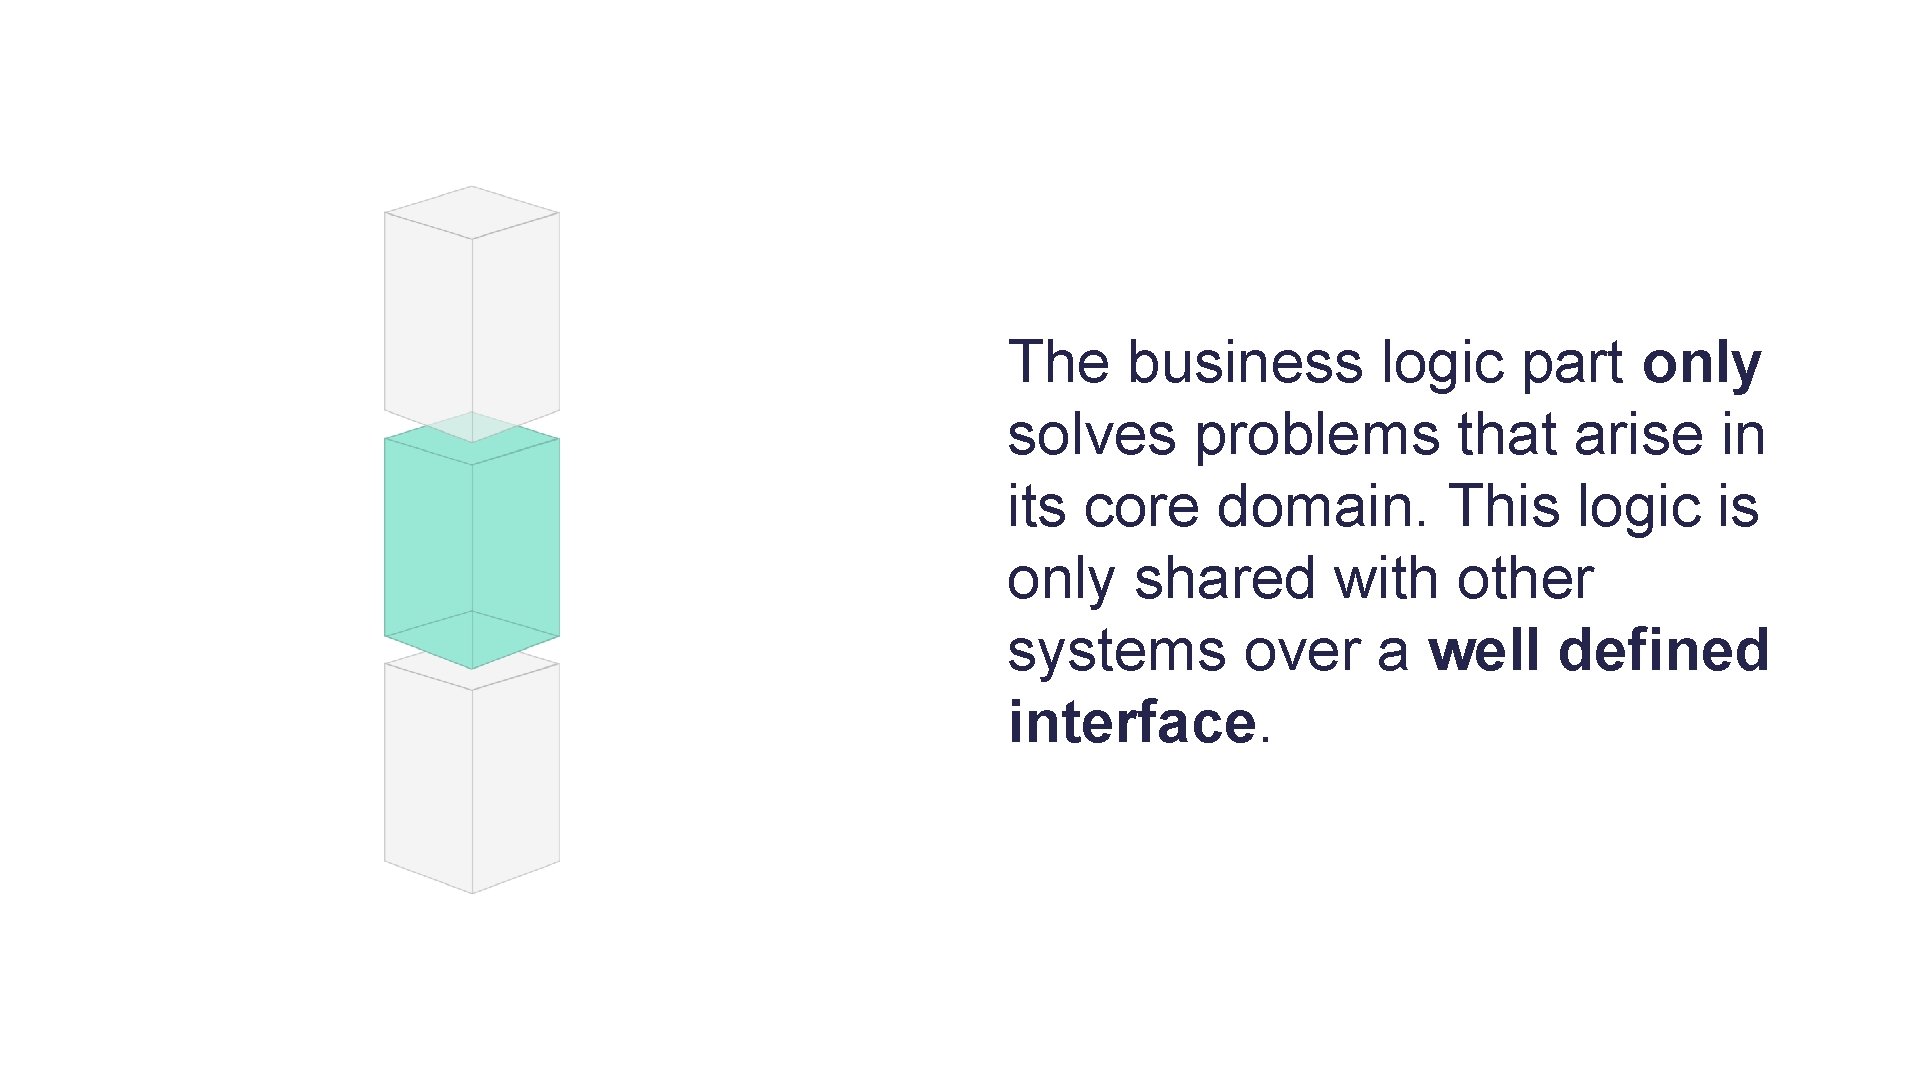 The business logic part only solves problems that arise in its core domain. This